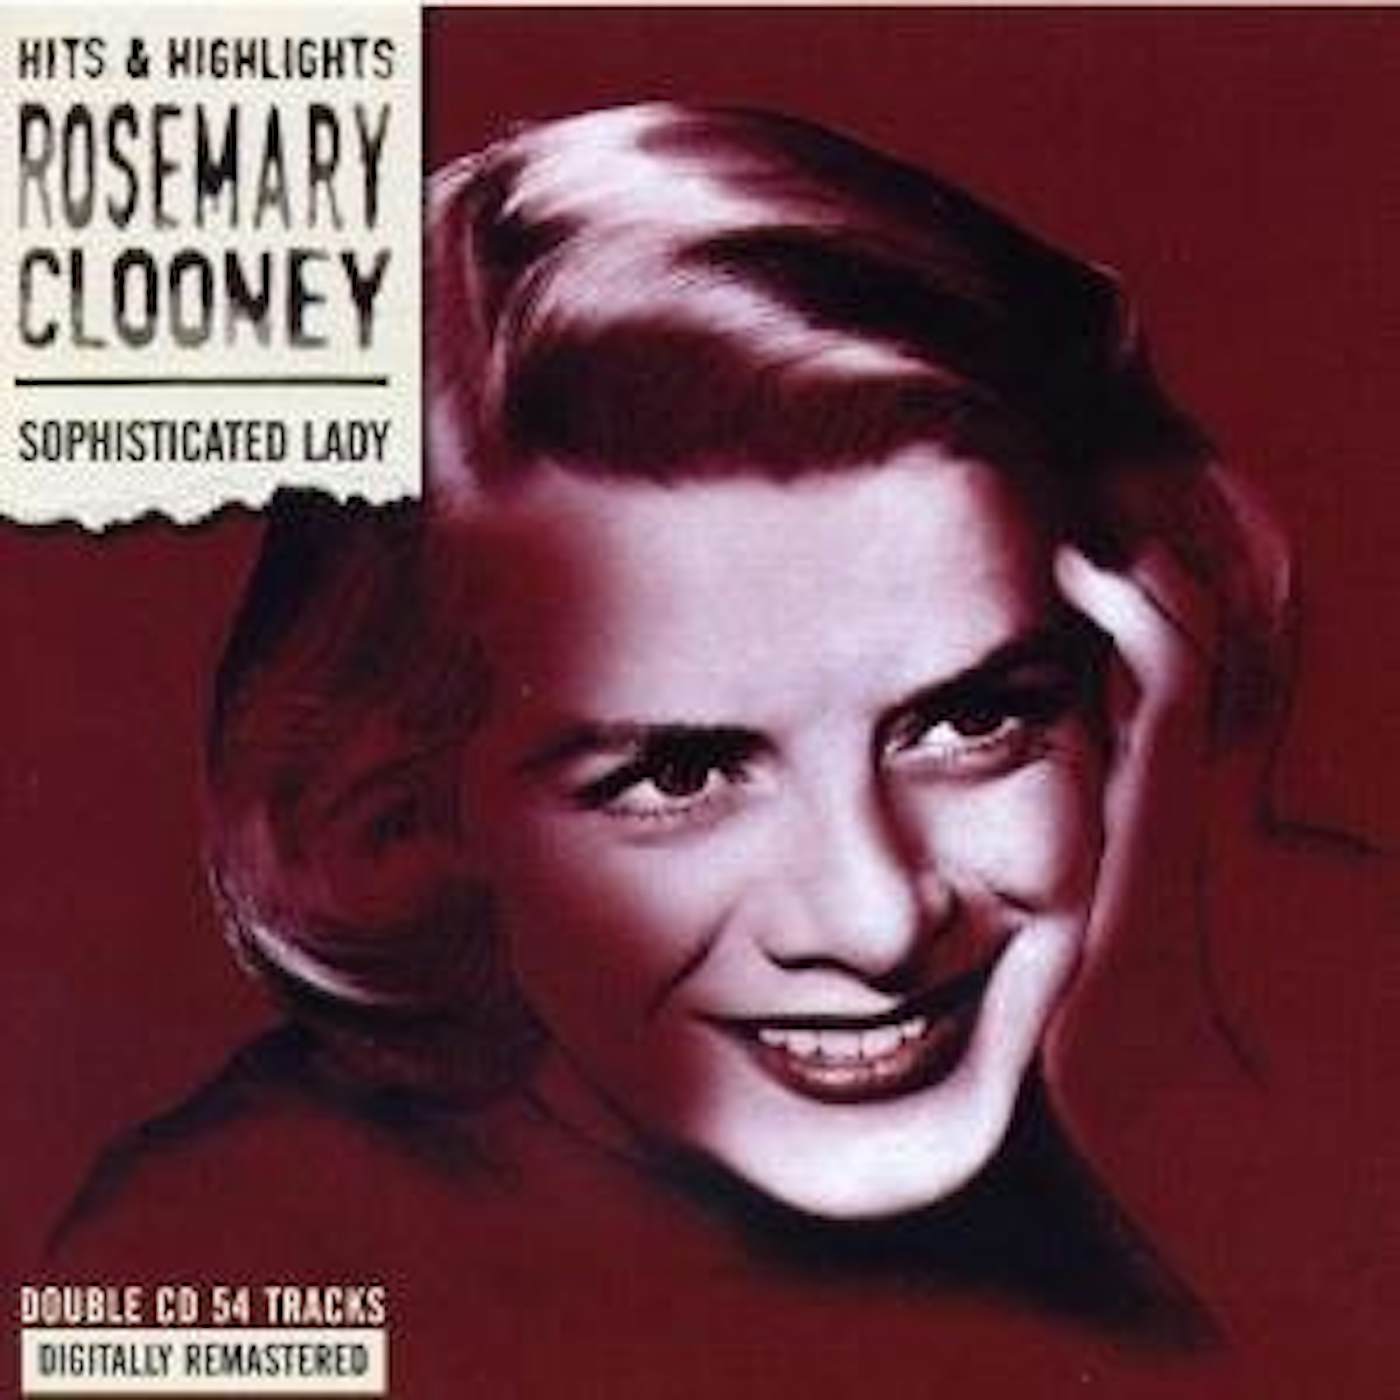 Rosemary Clooney SOPHISTICATED LADY CD